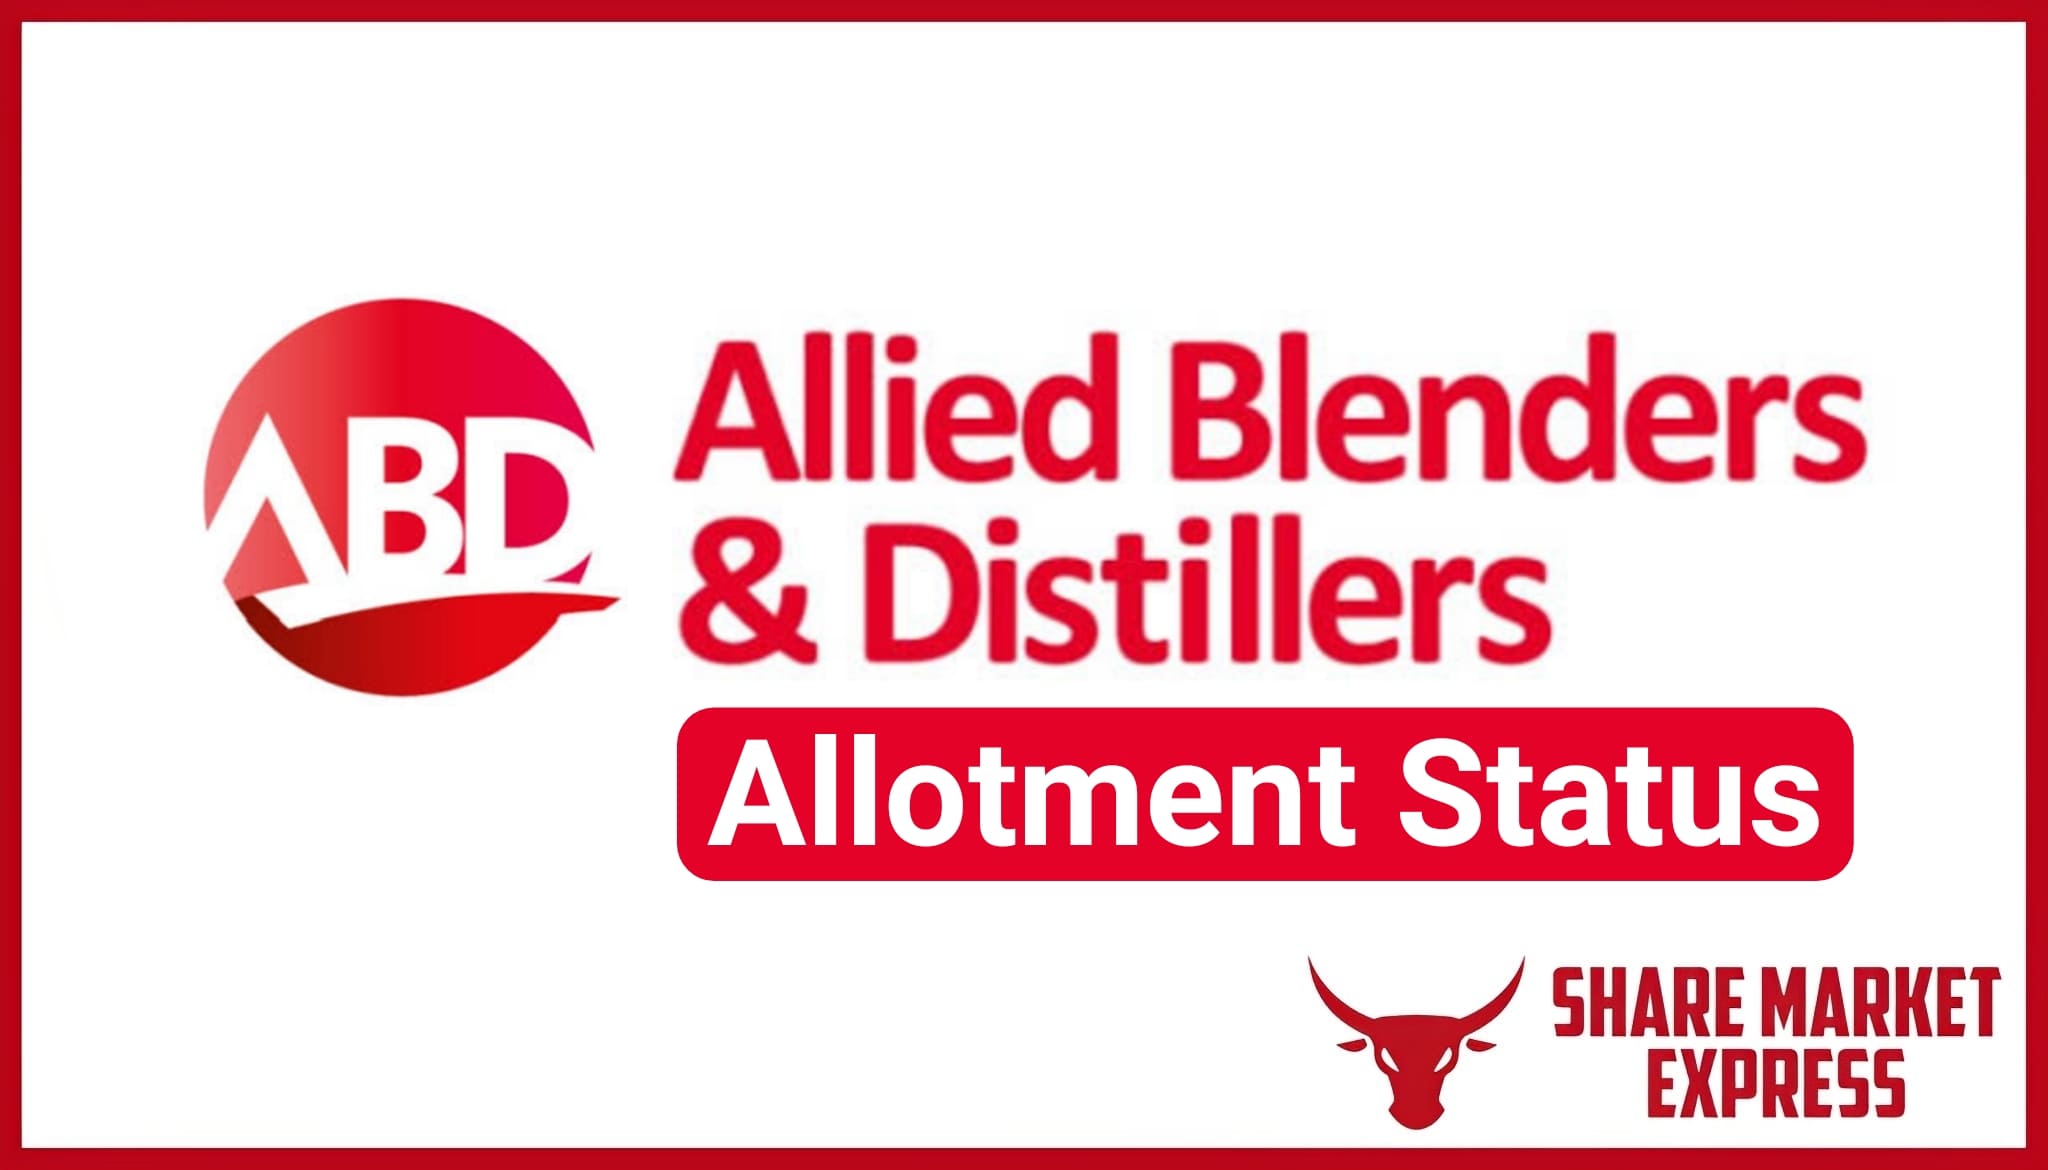 Allied Blenders and Distillers IPO Allotment Status Allied Blenders IPO Allotment Status